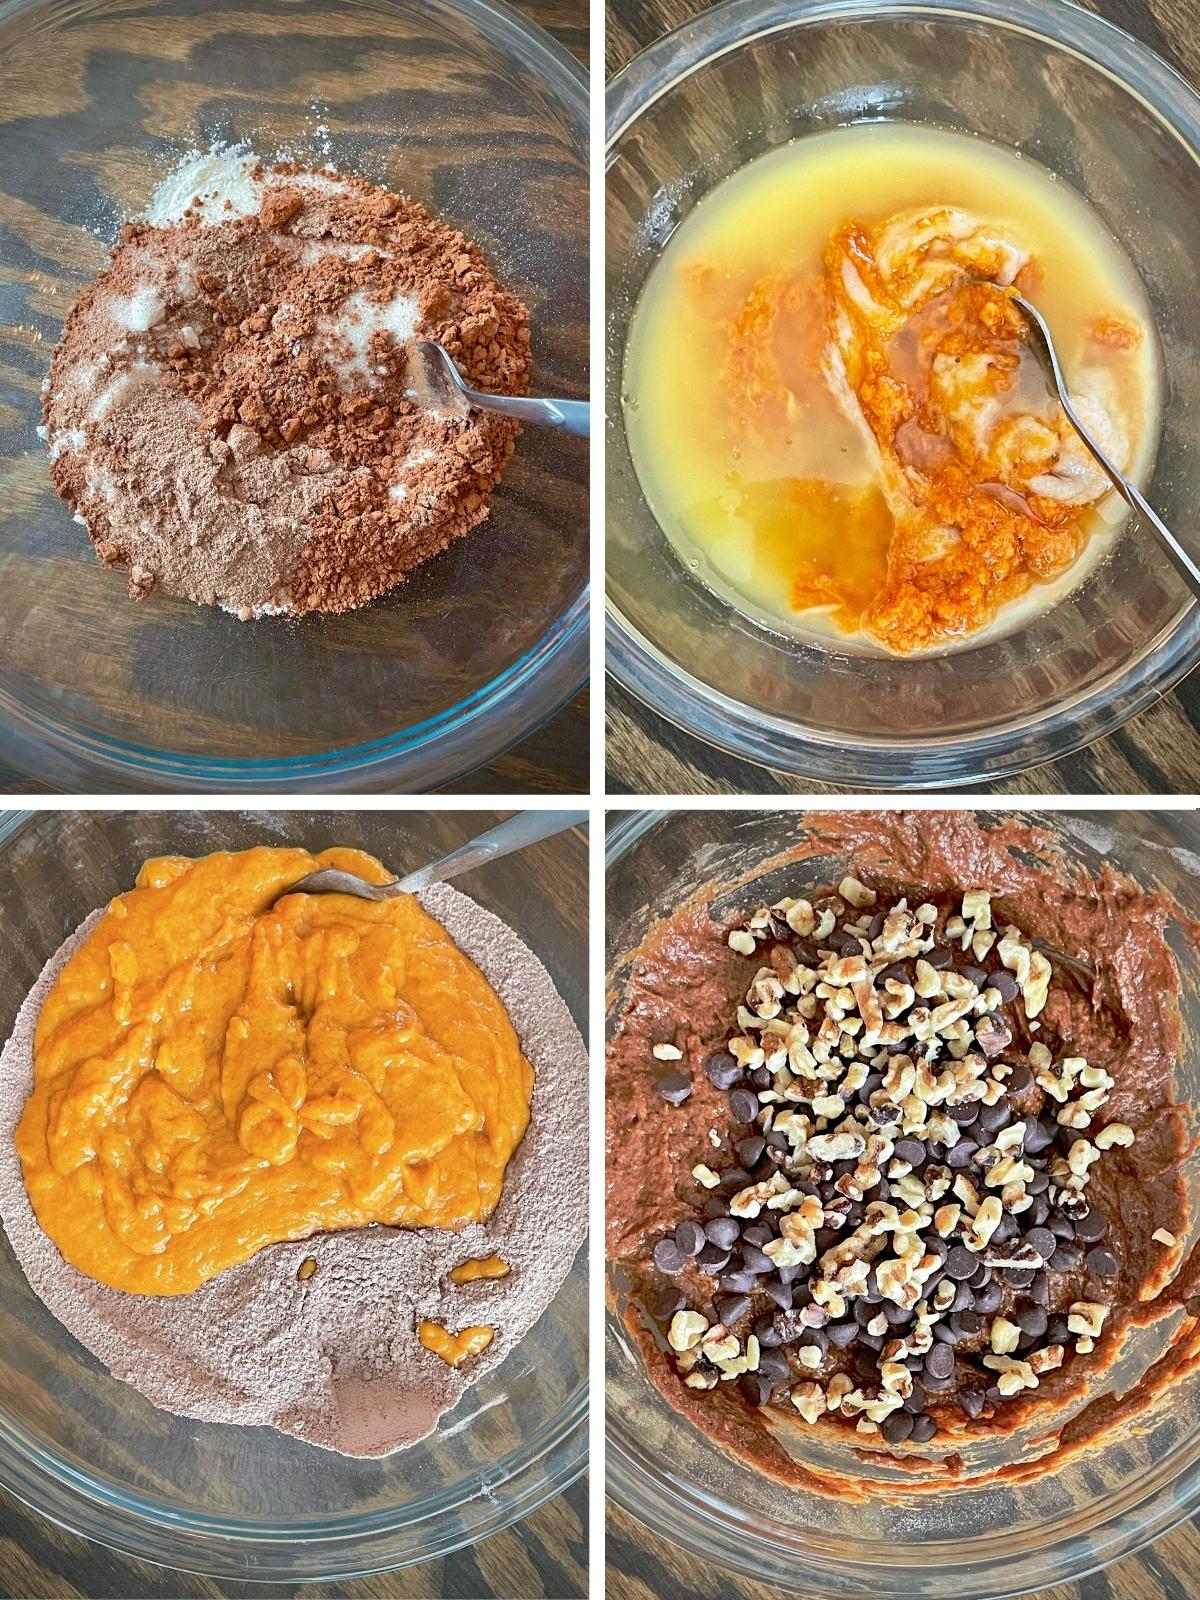 Steps for making pumpkin chocolate bread.